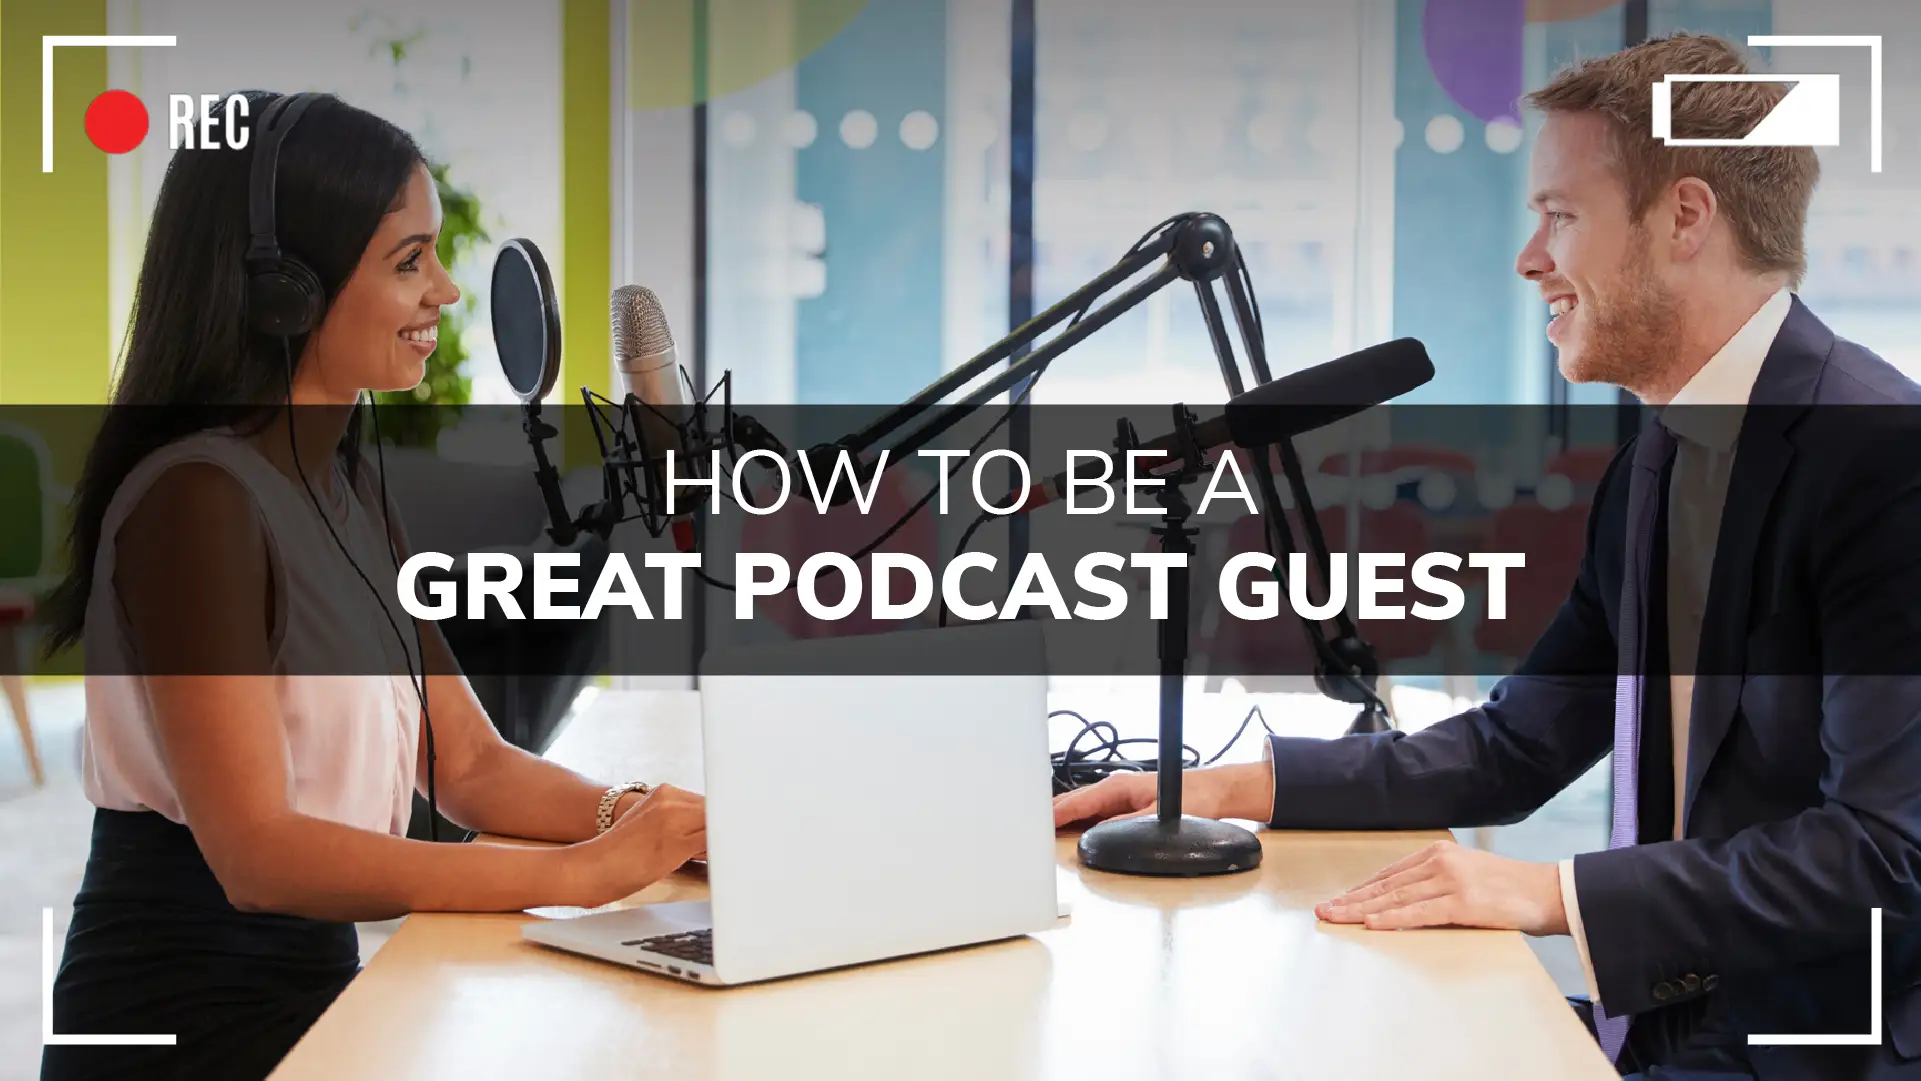 How To Be A Great Podcast Guest